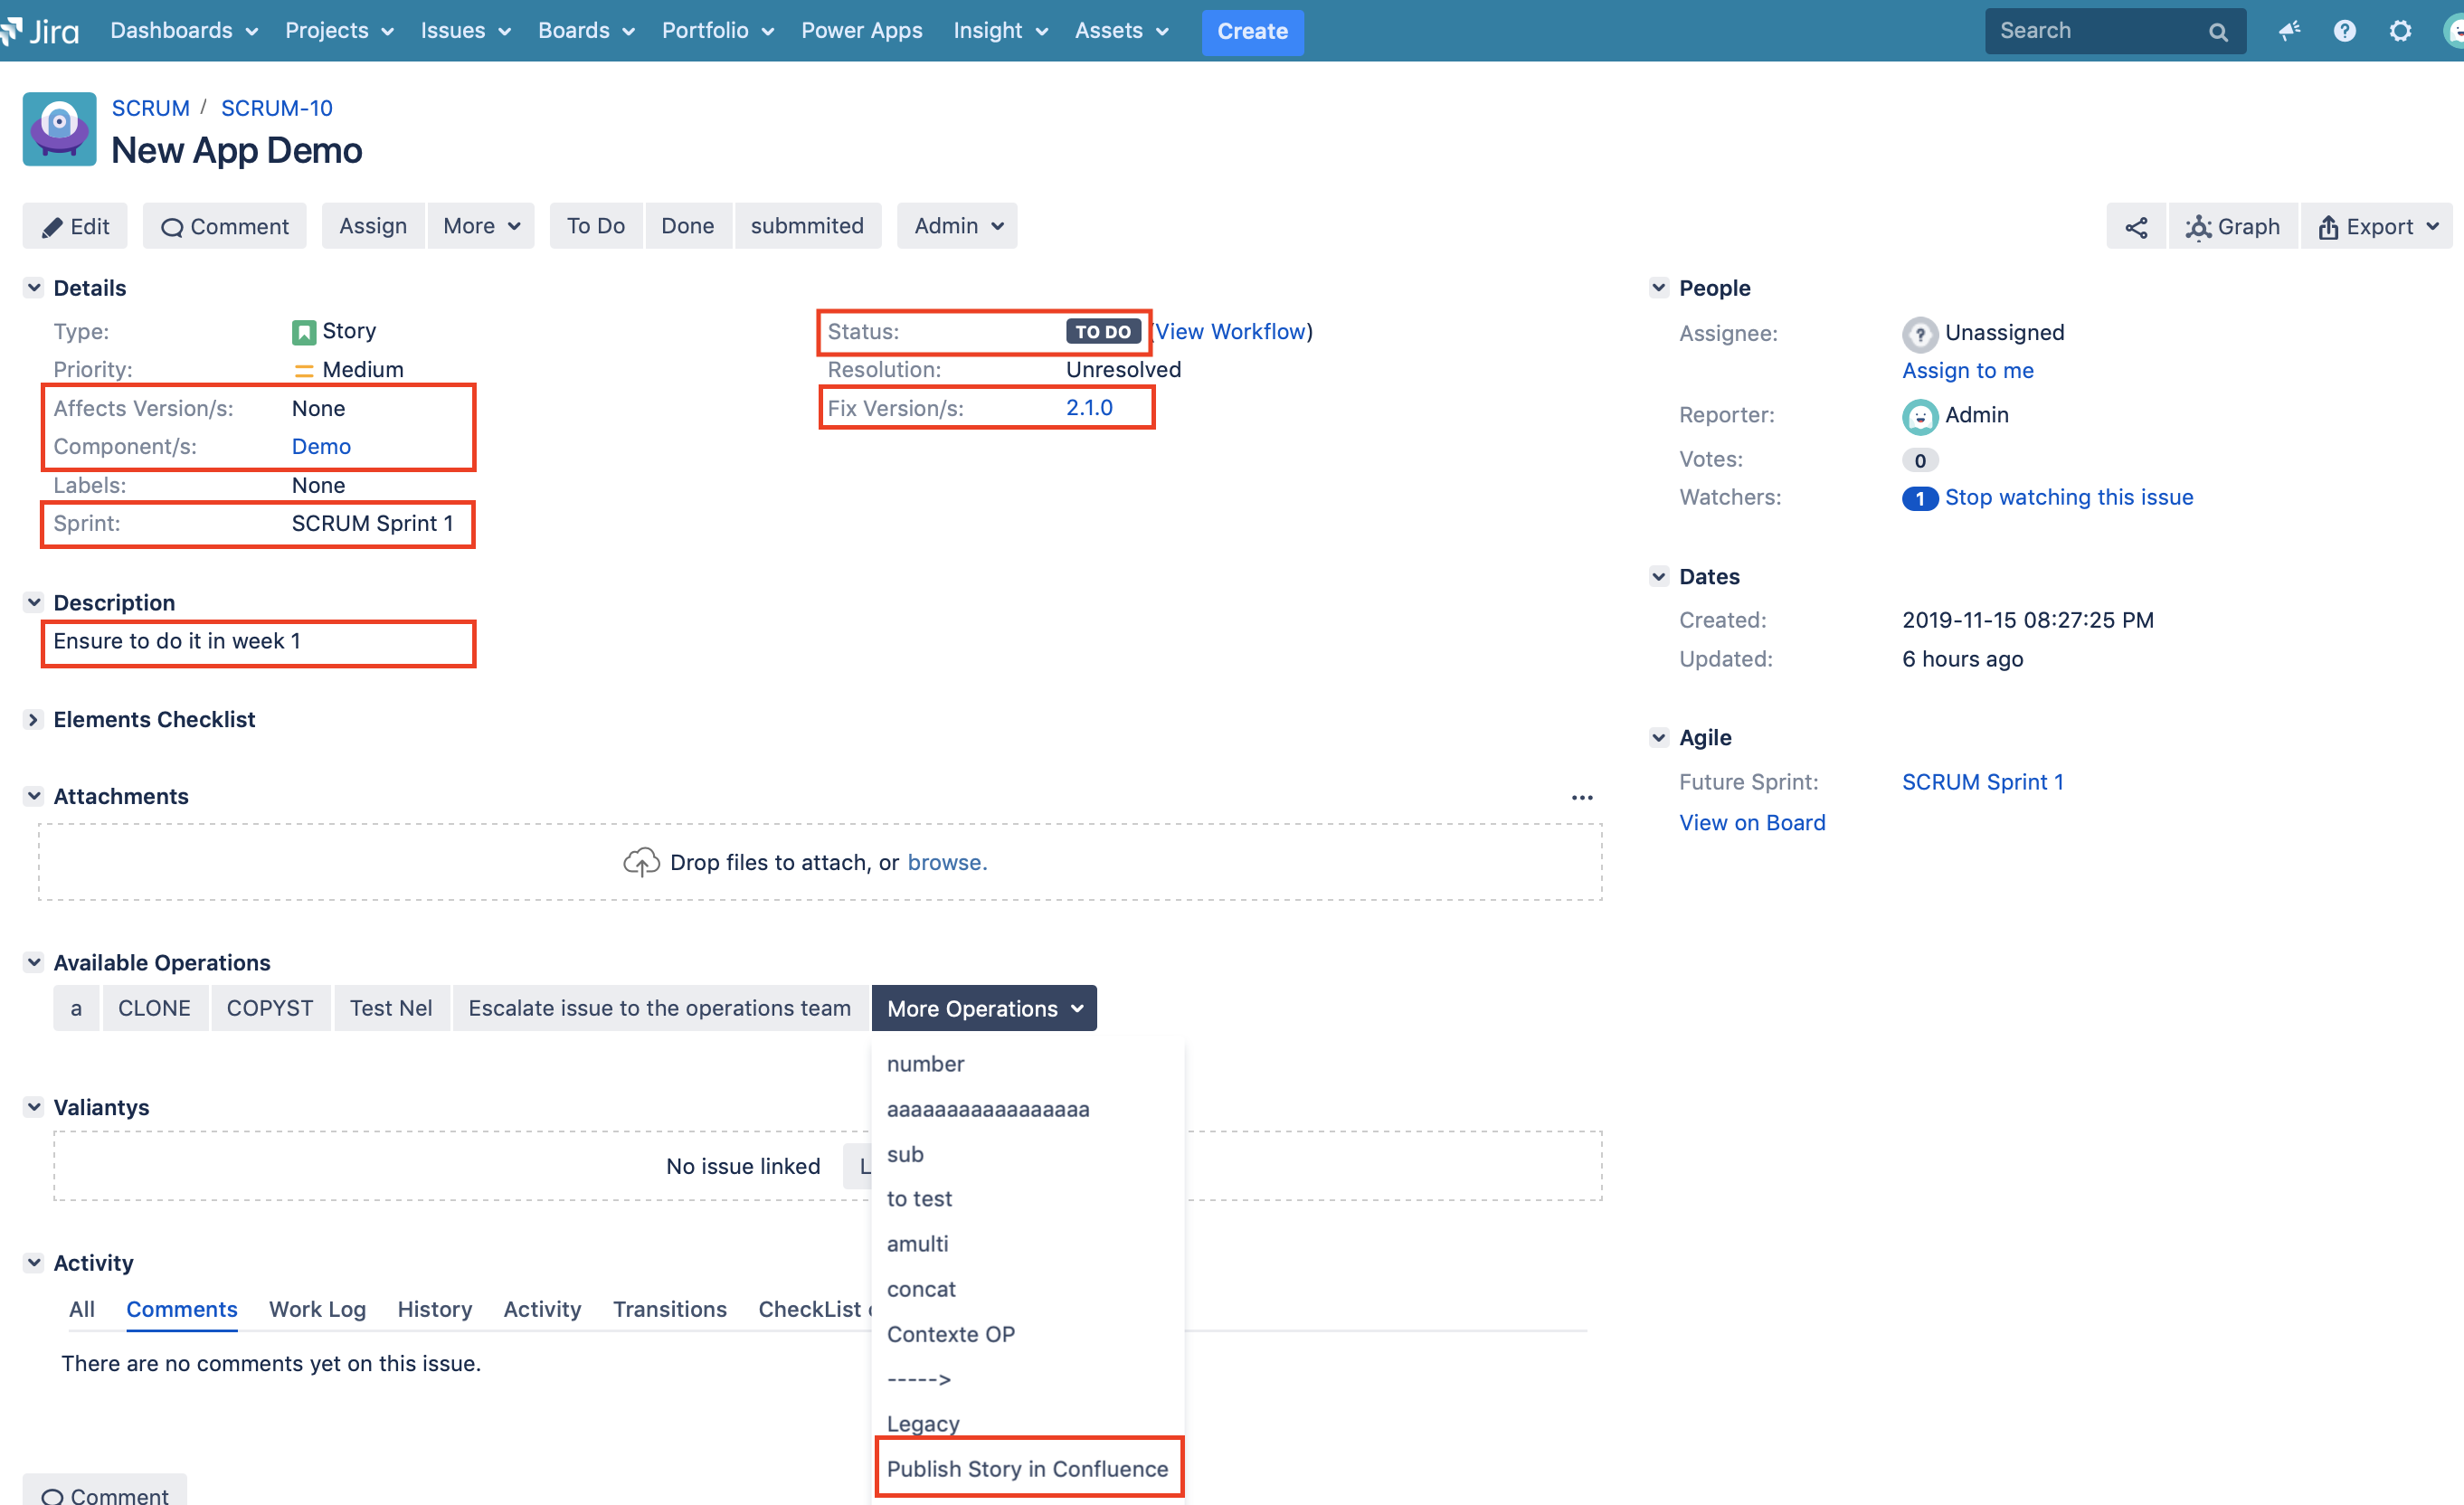 Publish Jira issues in Confluence